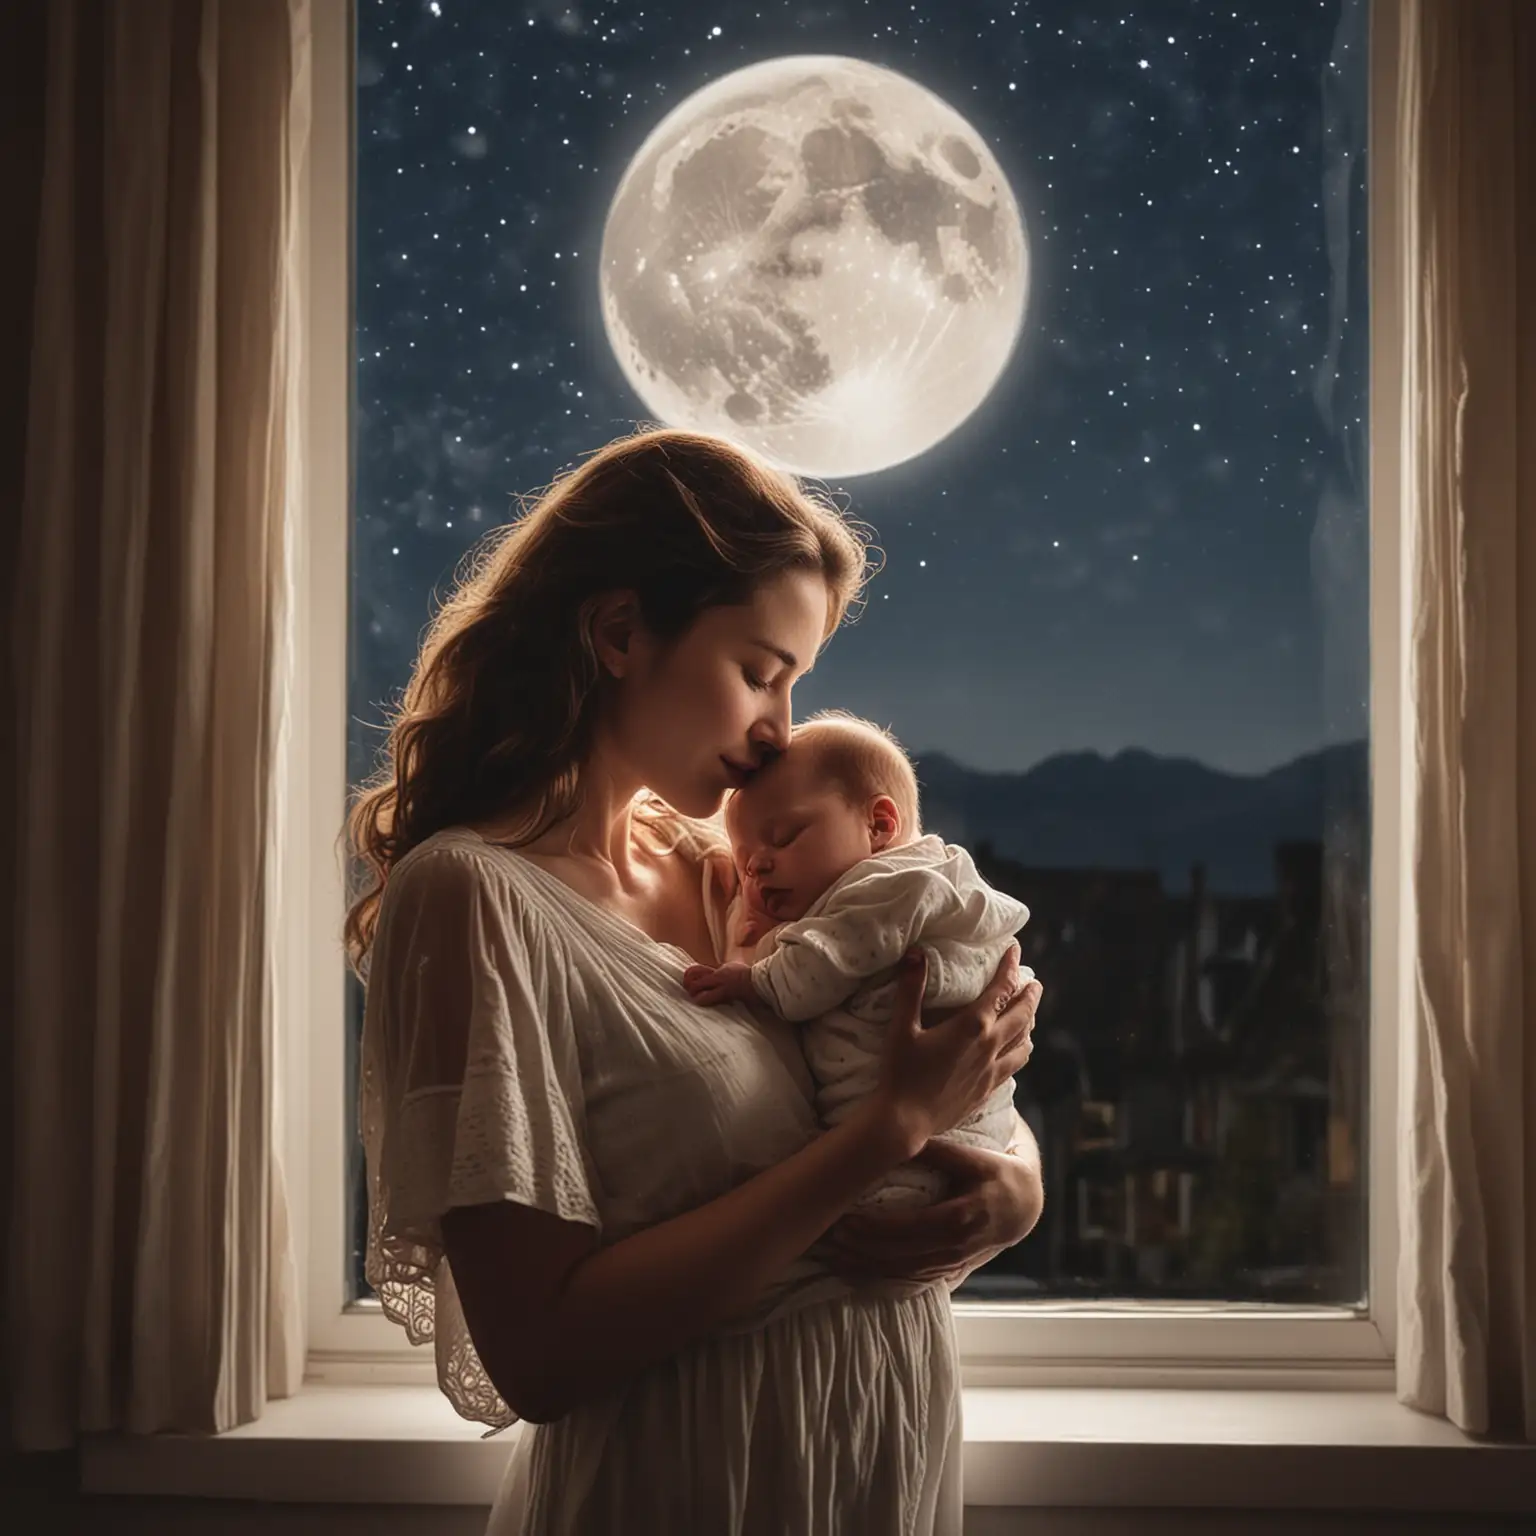 Mother Singing Lullaby to Sleeping Baby by Moonlit Window